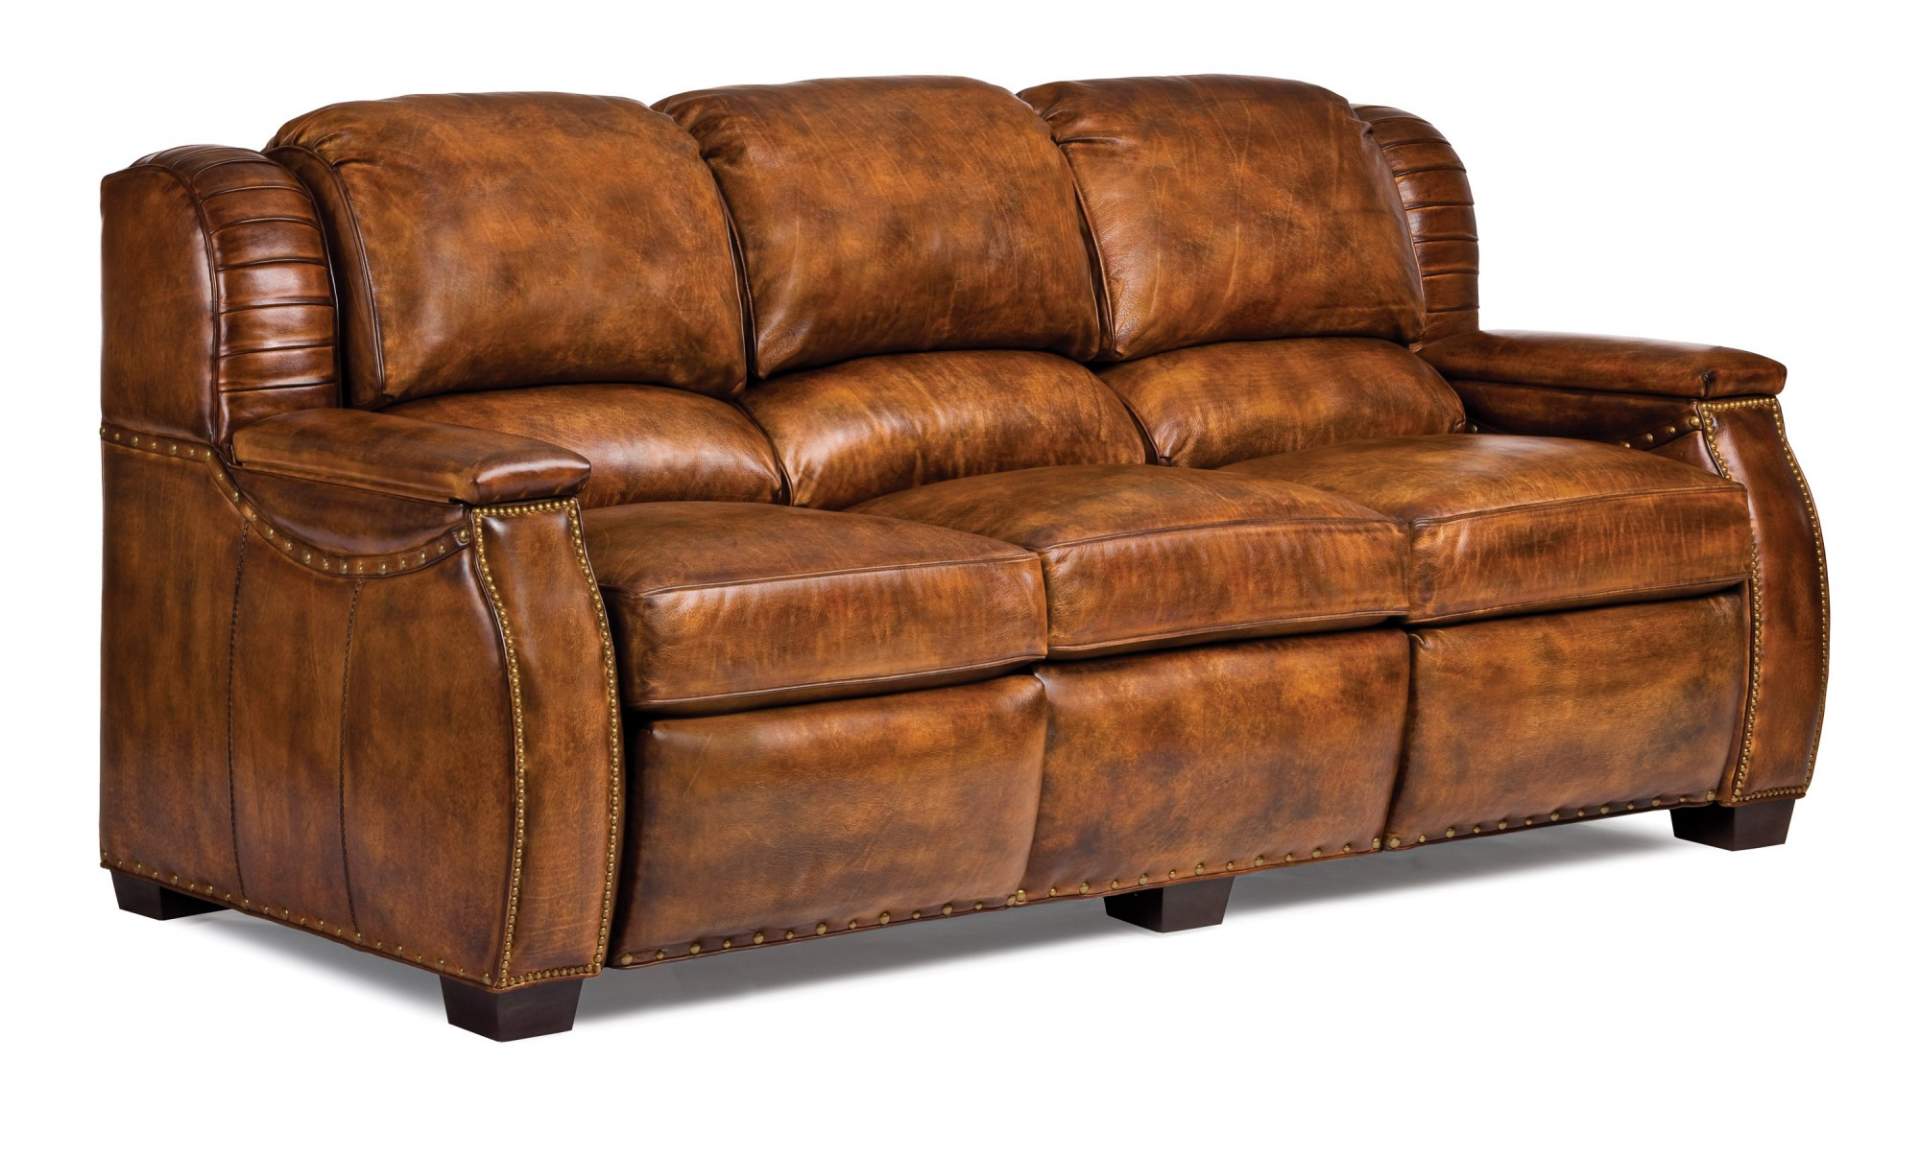 American Reclining Sofa, Best Leather Recliner Sofas 2021